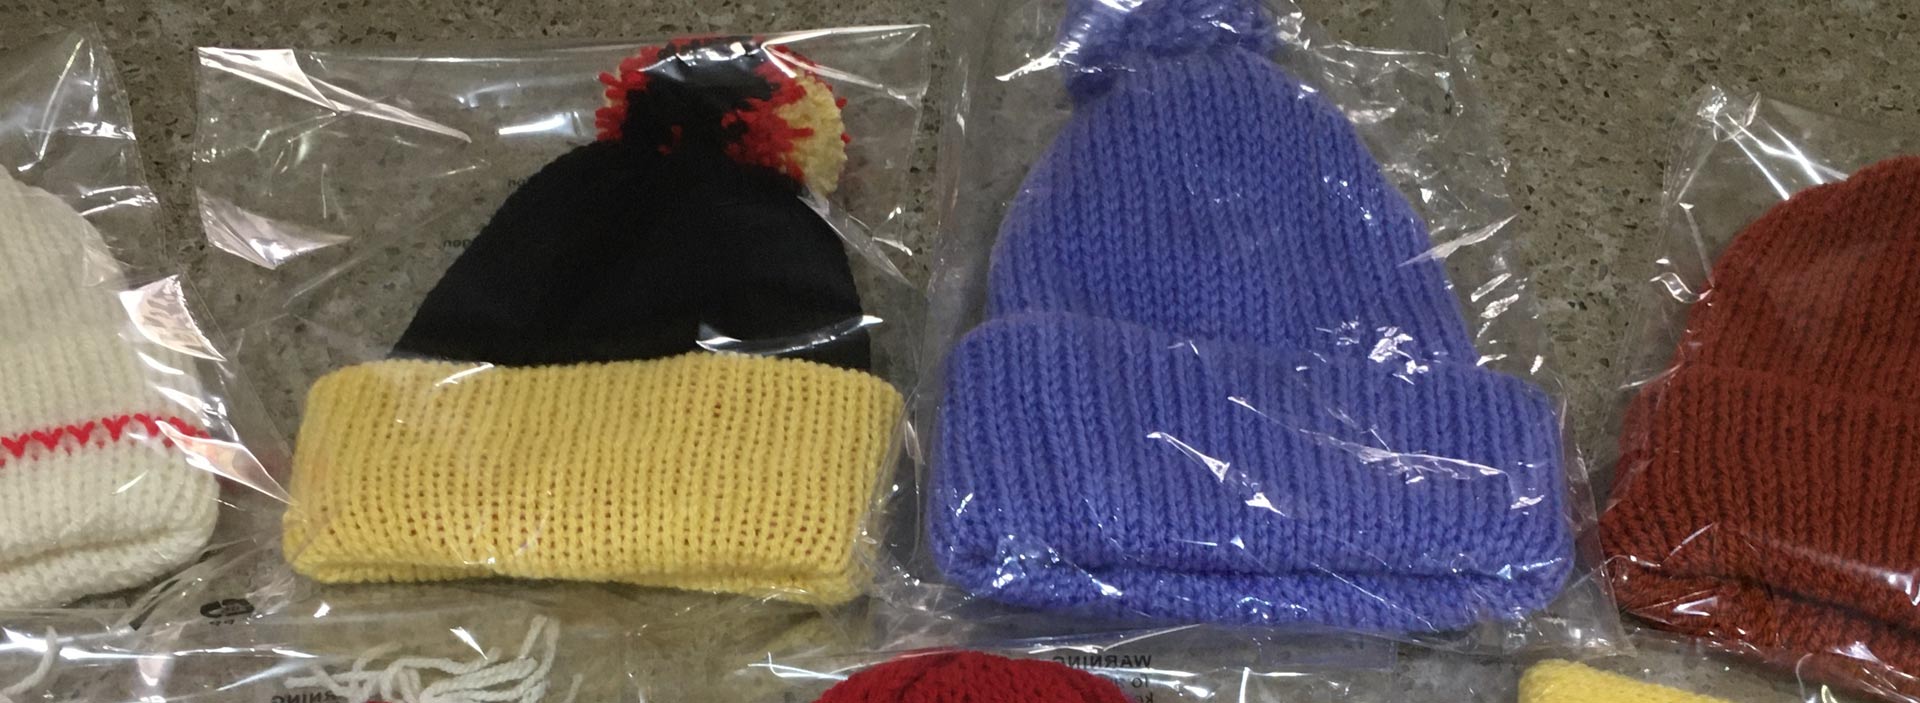 image of woollen hats, headbands, ear warmers and koozies sold by Shirley's Knitting Shop